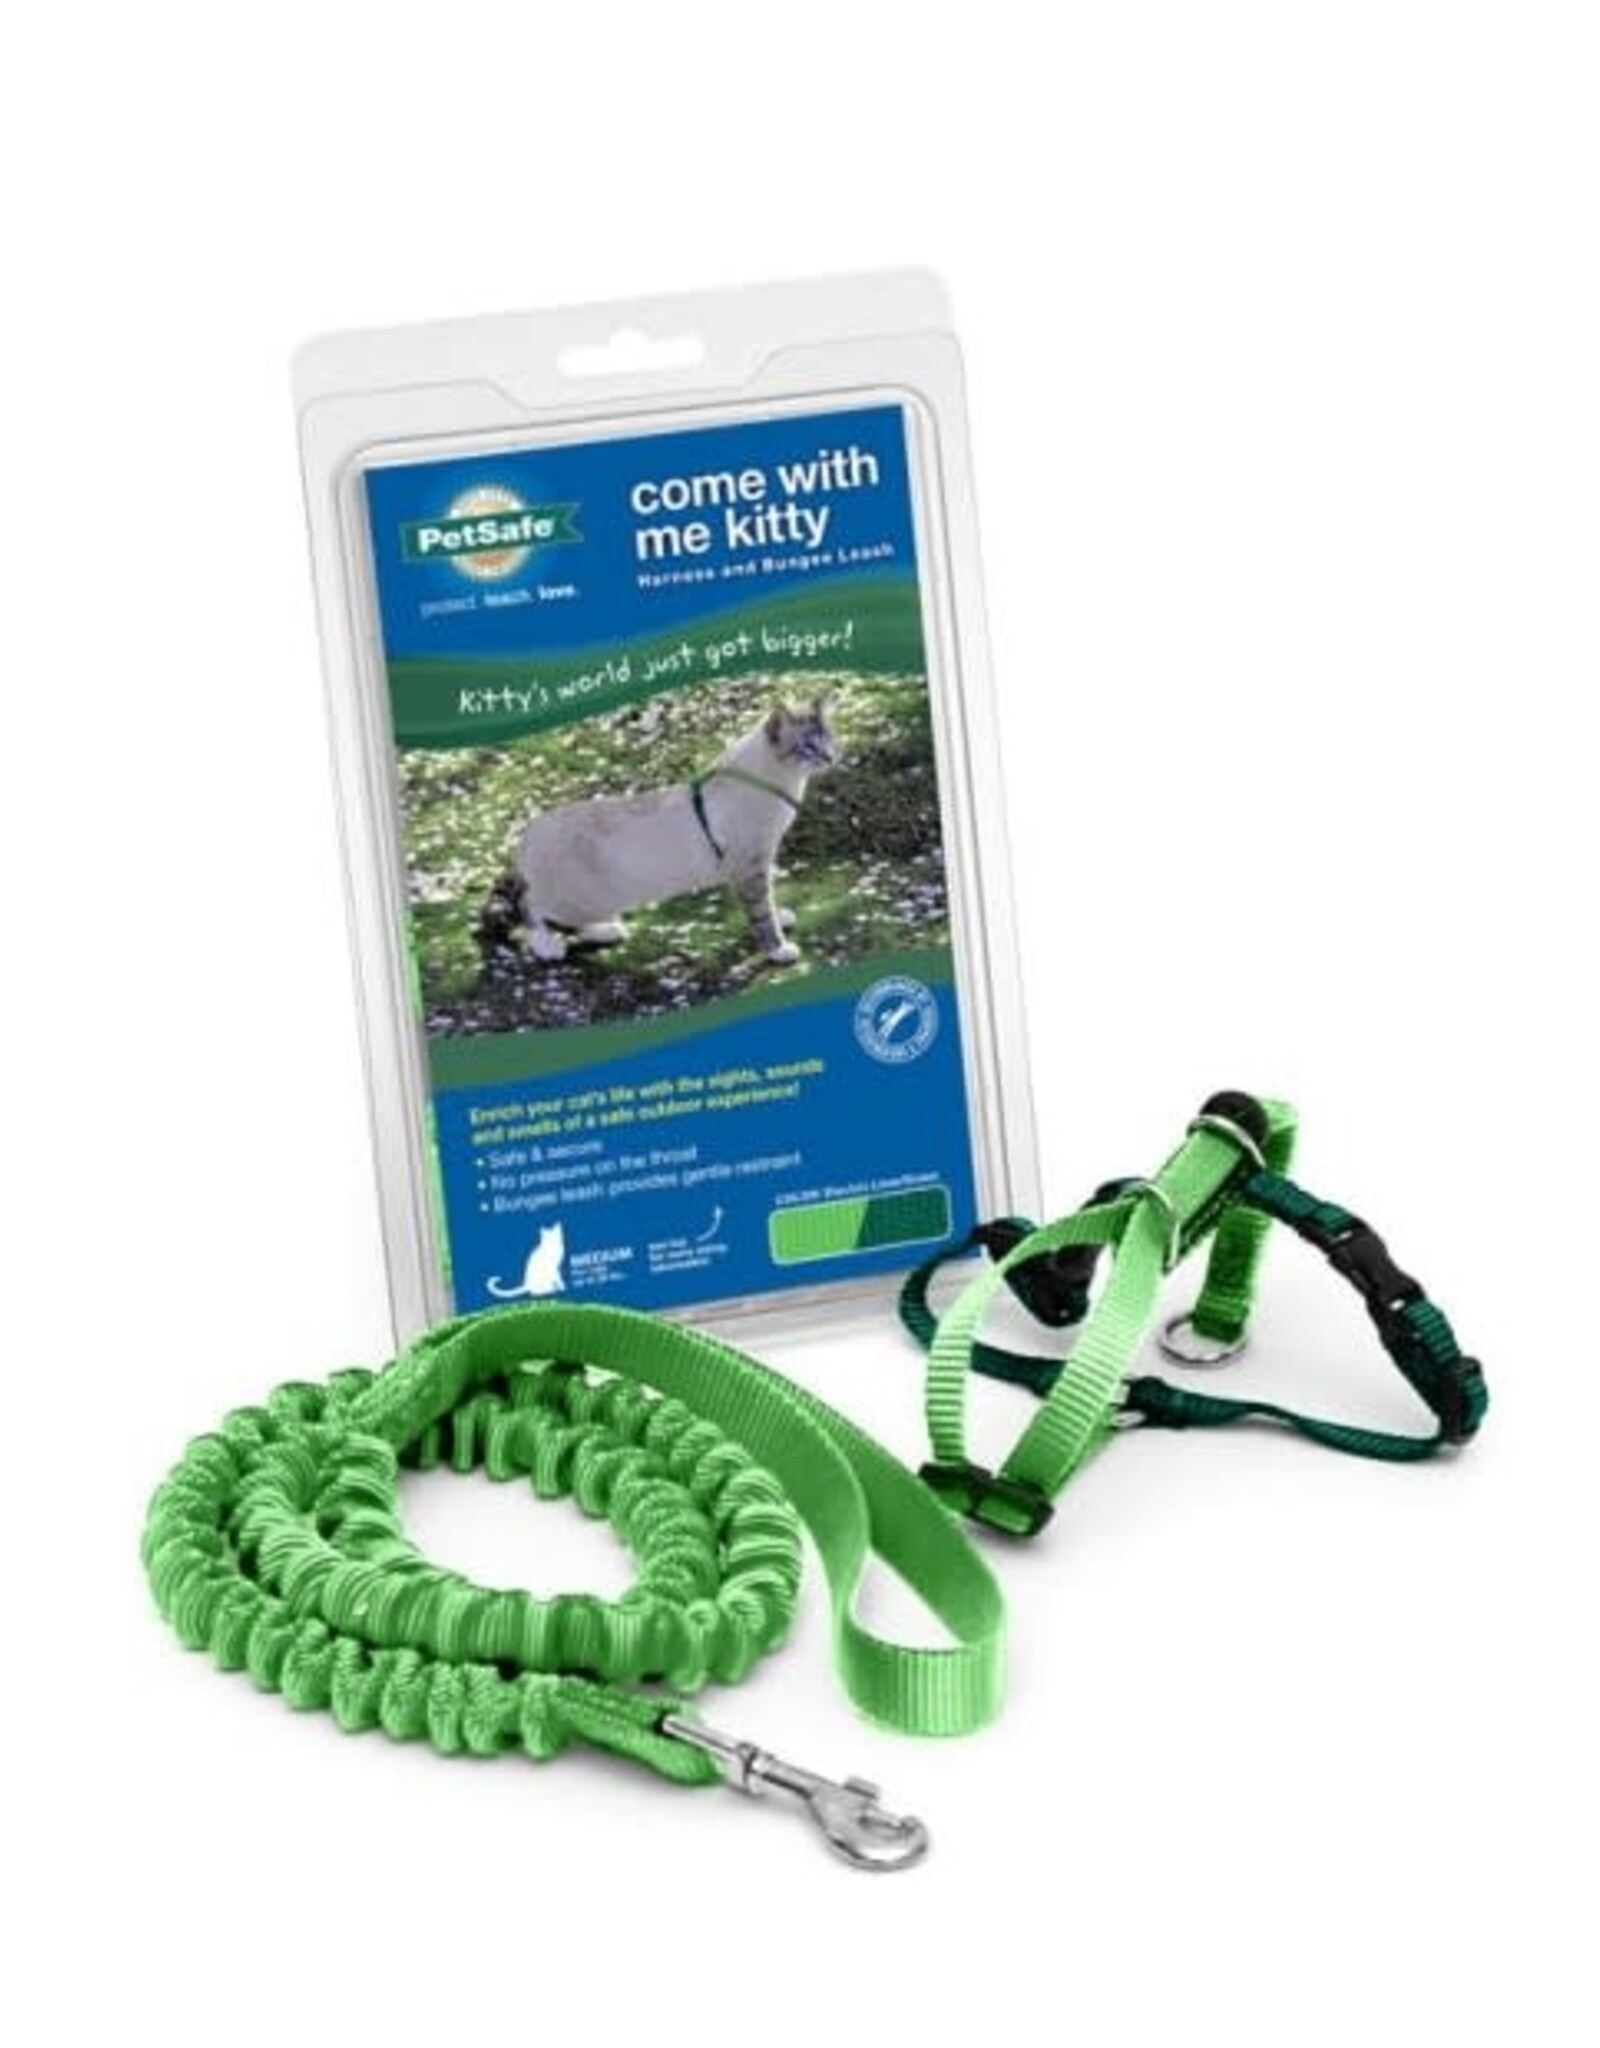 RADIO SYSTEMS CORP(PET SAFE) Come With Me Kitty Harness & Bungee Leash Large Electric Lime